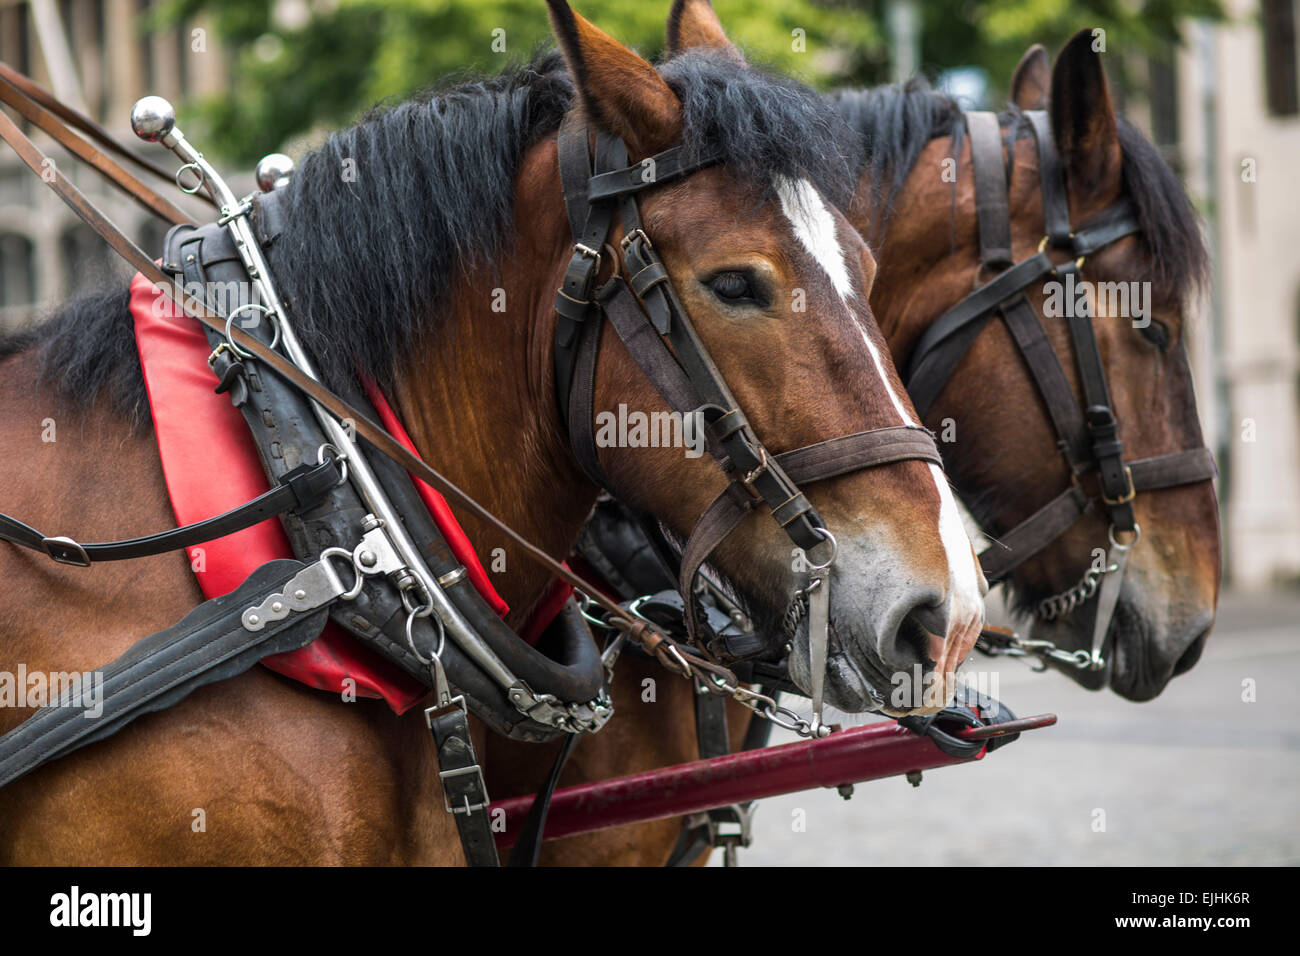 Horse and carriage tours of historic district, Antwerp, Belgium Stock Photo